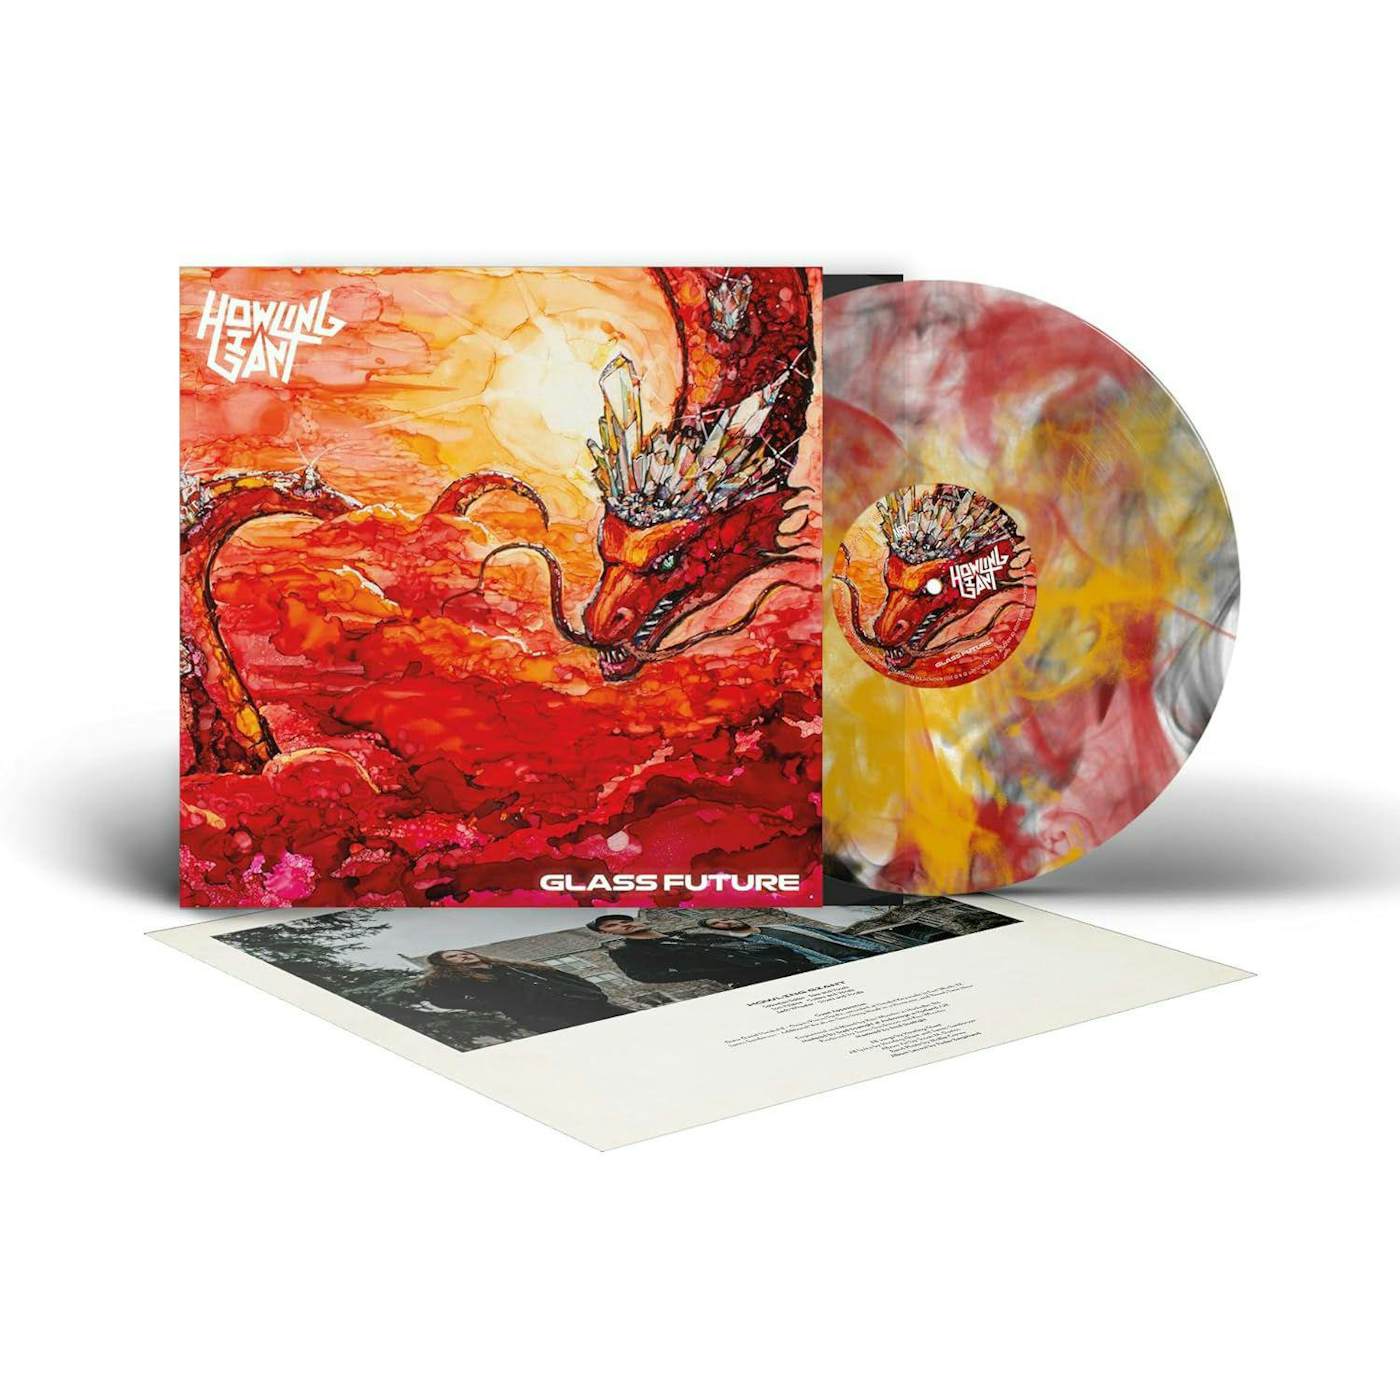 Howling Giant Glass Future (Red/Yellow) Vinyl Record